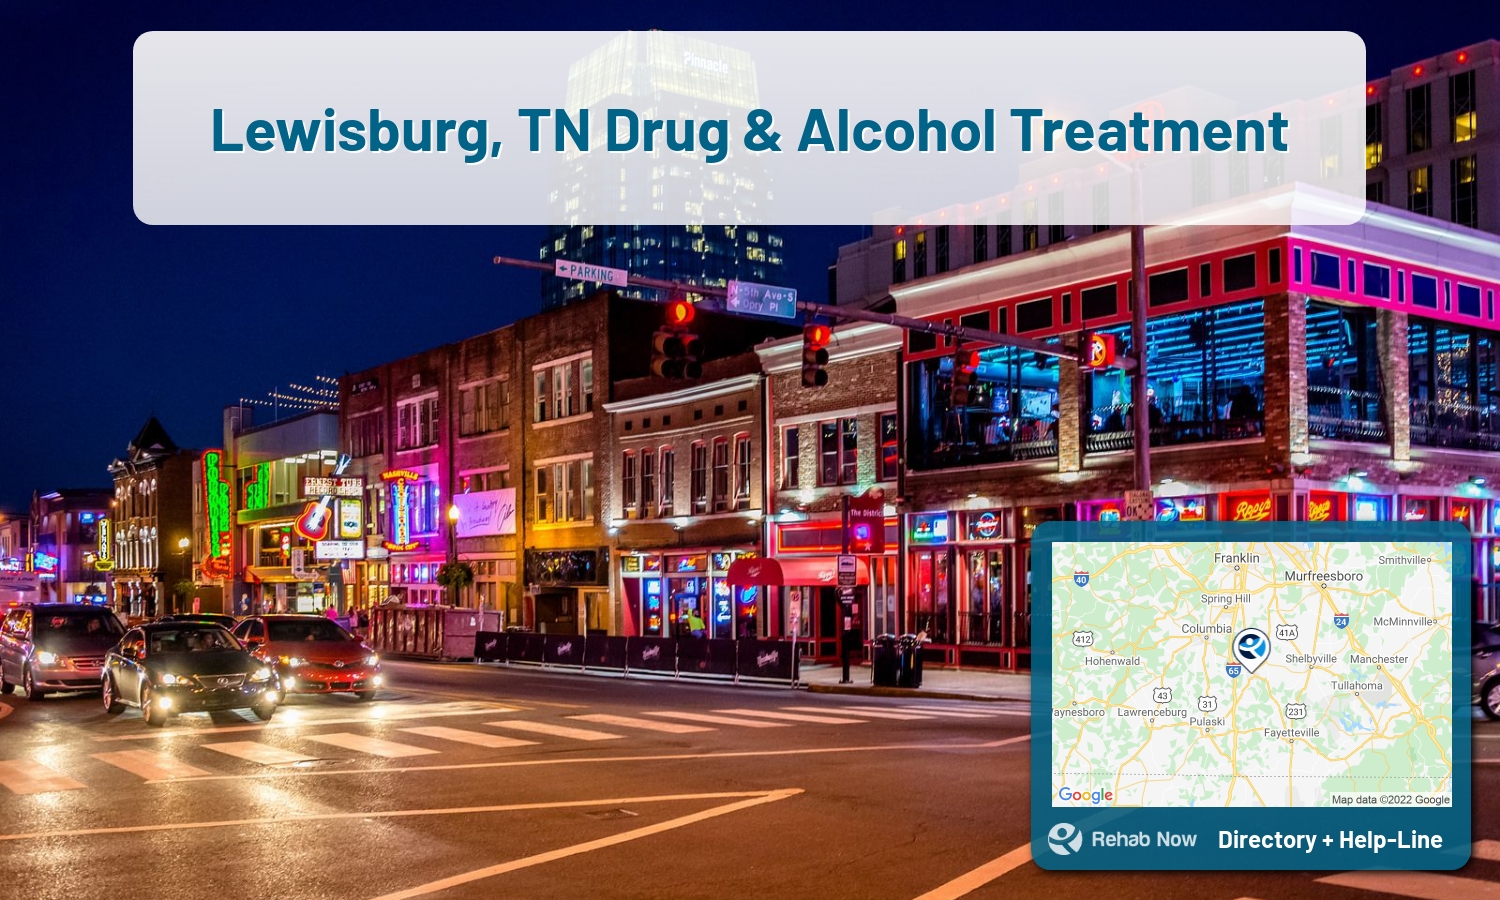 Lewisburg, TN Treatment Centers. Find drug rehab in Lewisburg, Tennessee, or detox and treatment programs. Get the right help now!